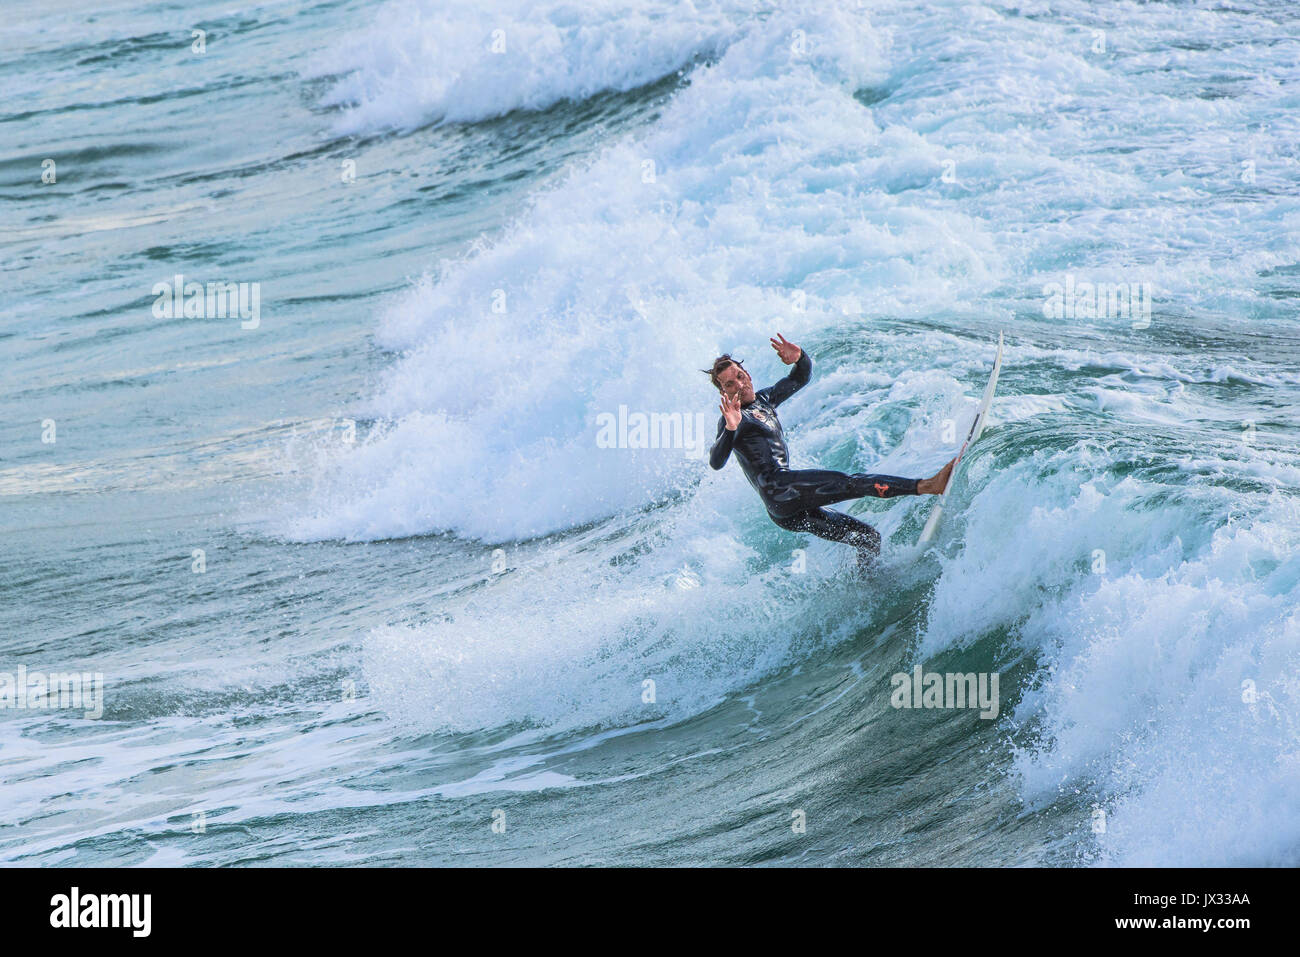 Surfing UK. A surfer riding a wave at Fistral in Newquay, Cornwall. Stock Photo